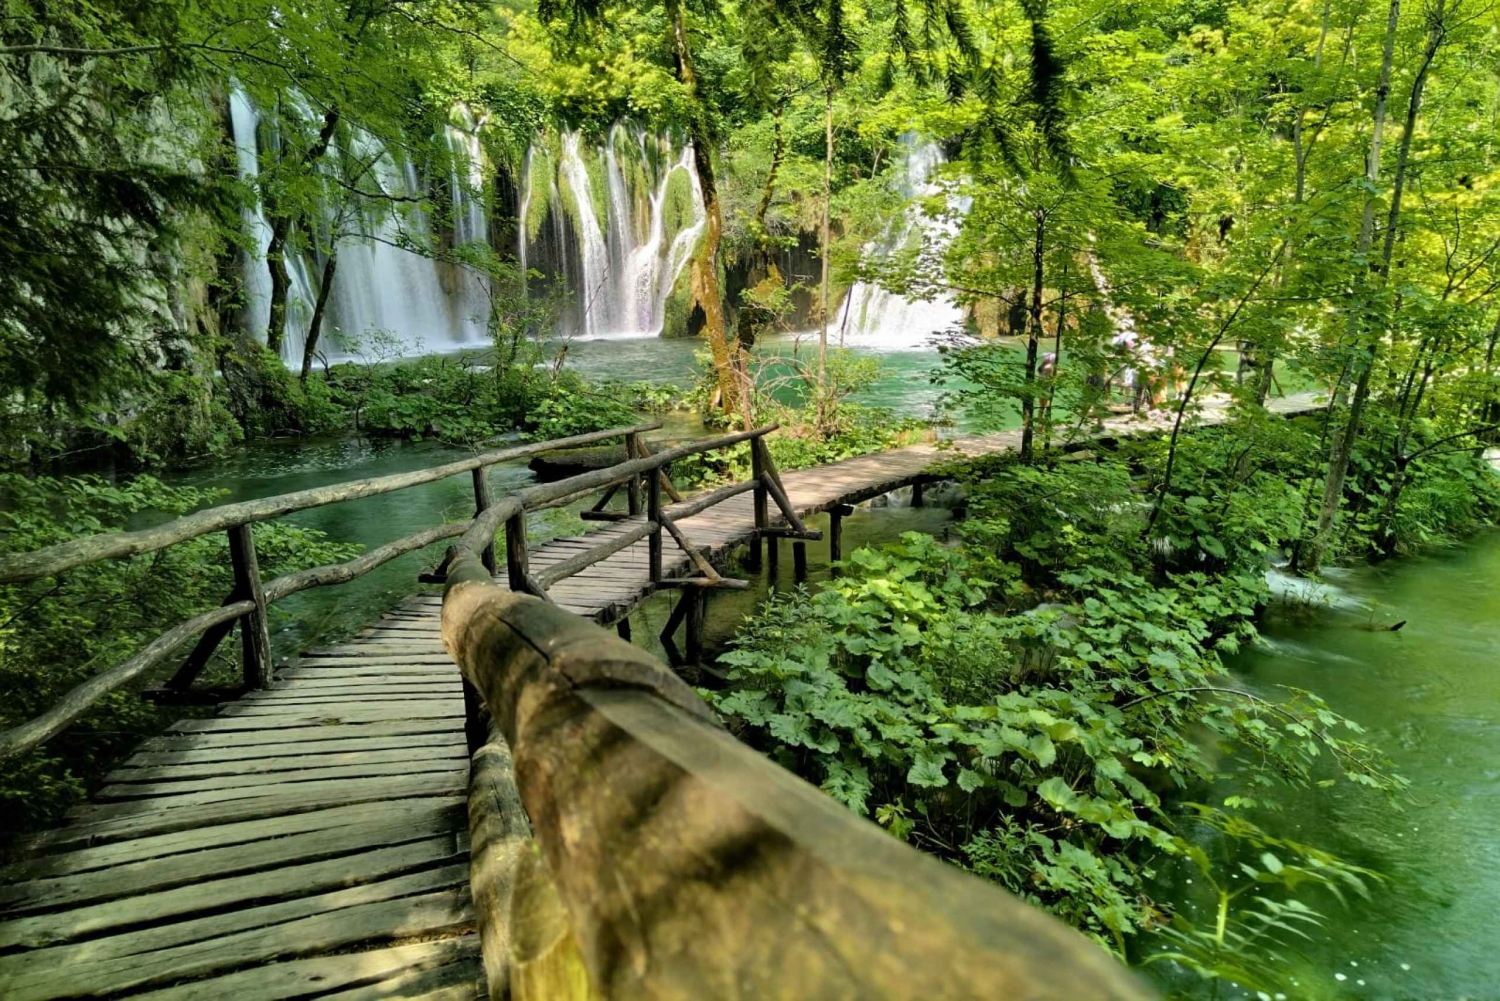 Plitvice lakes: Guided walking tour with a boat ride